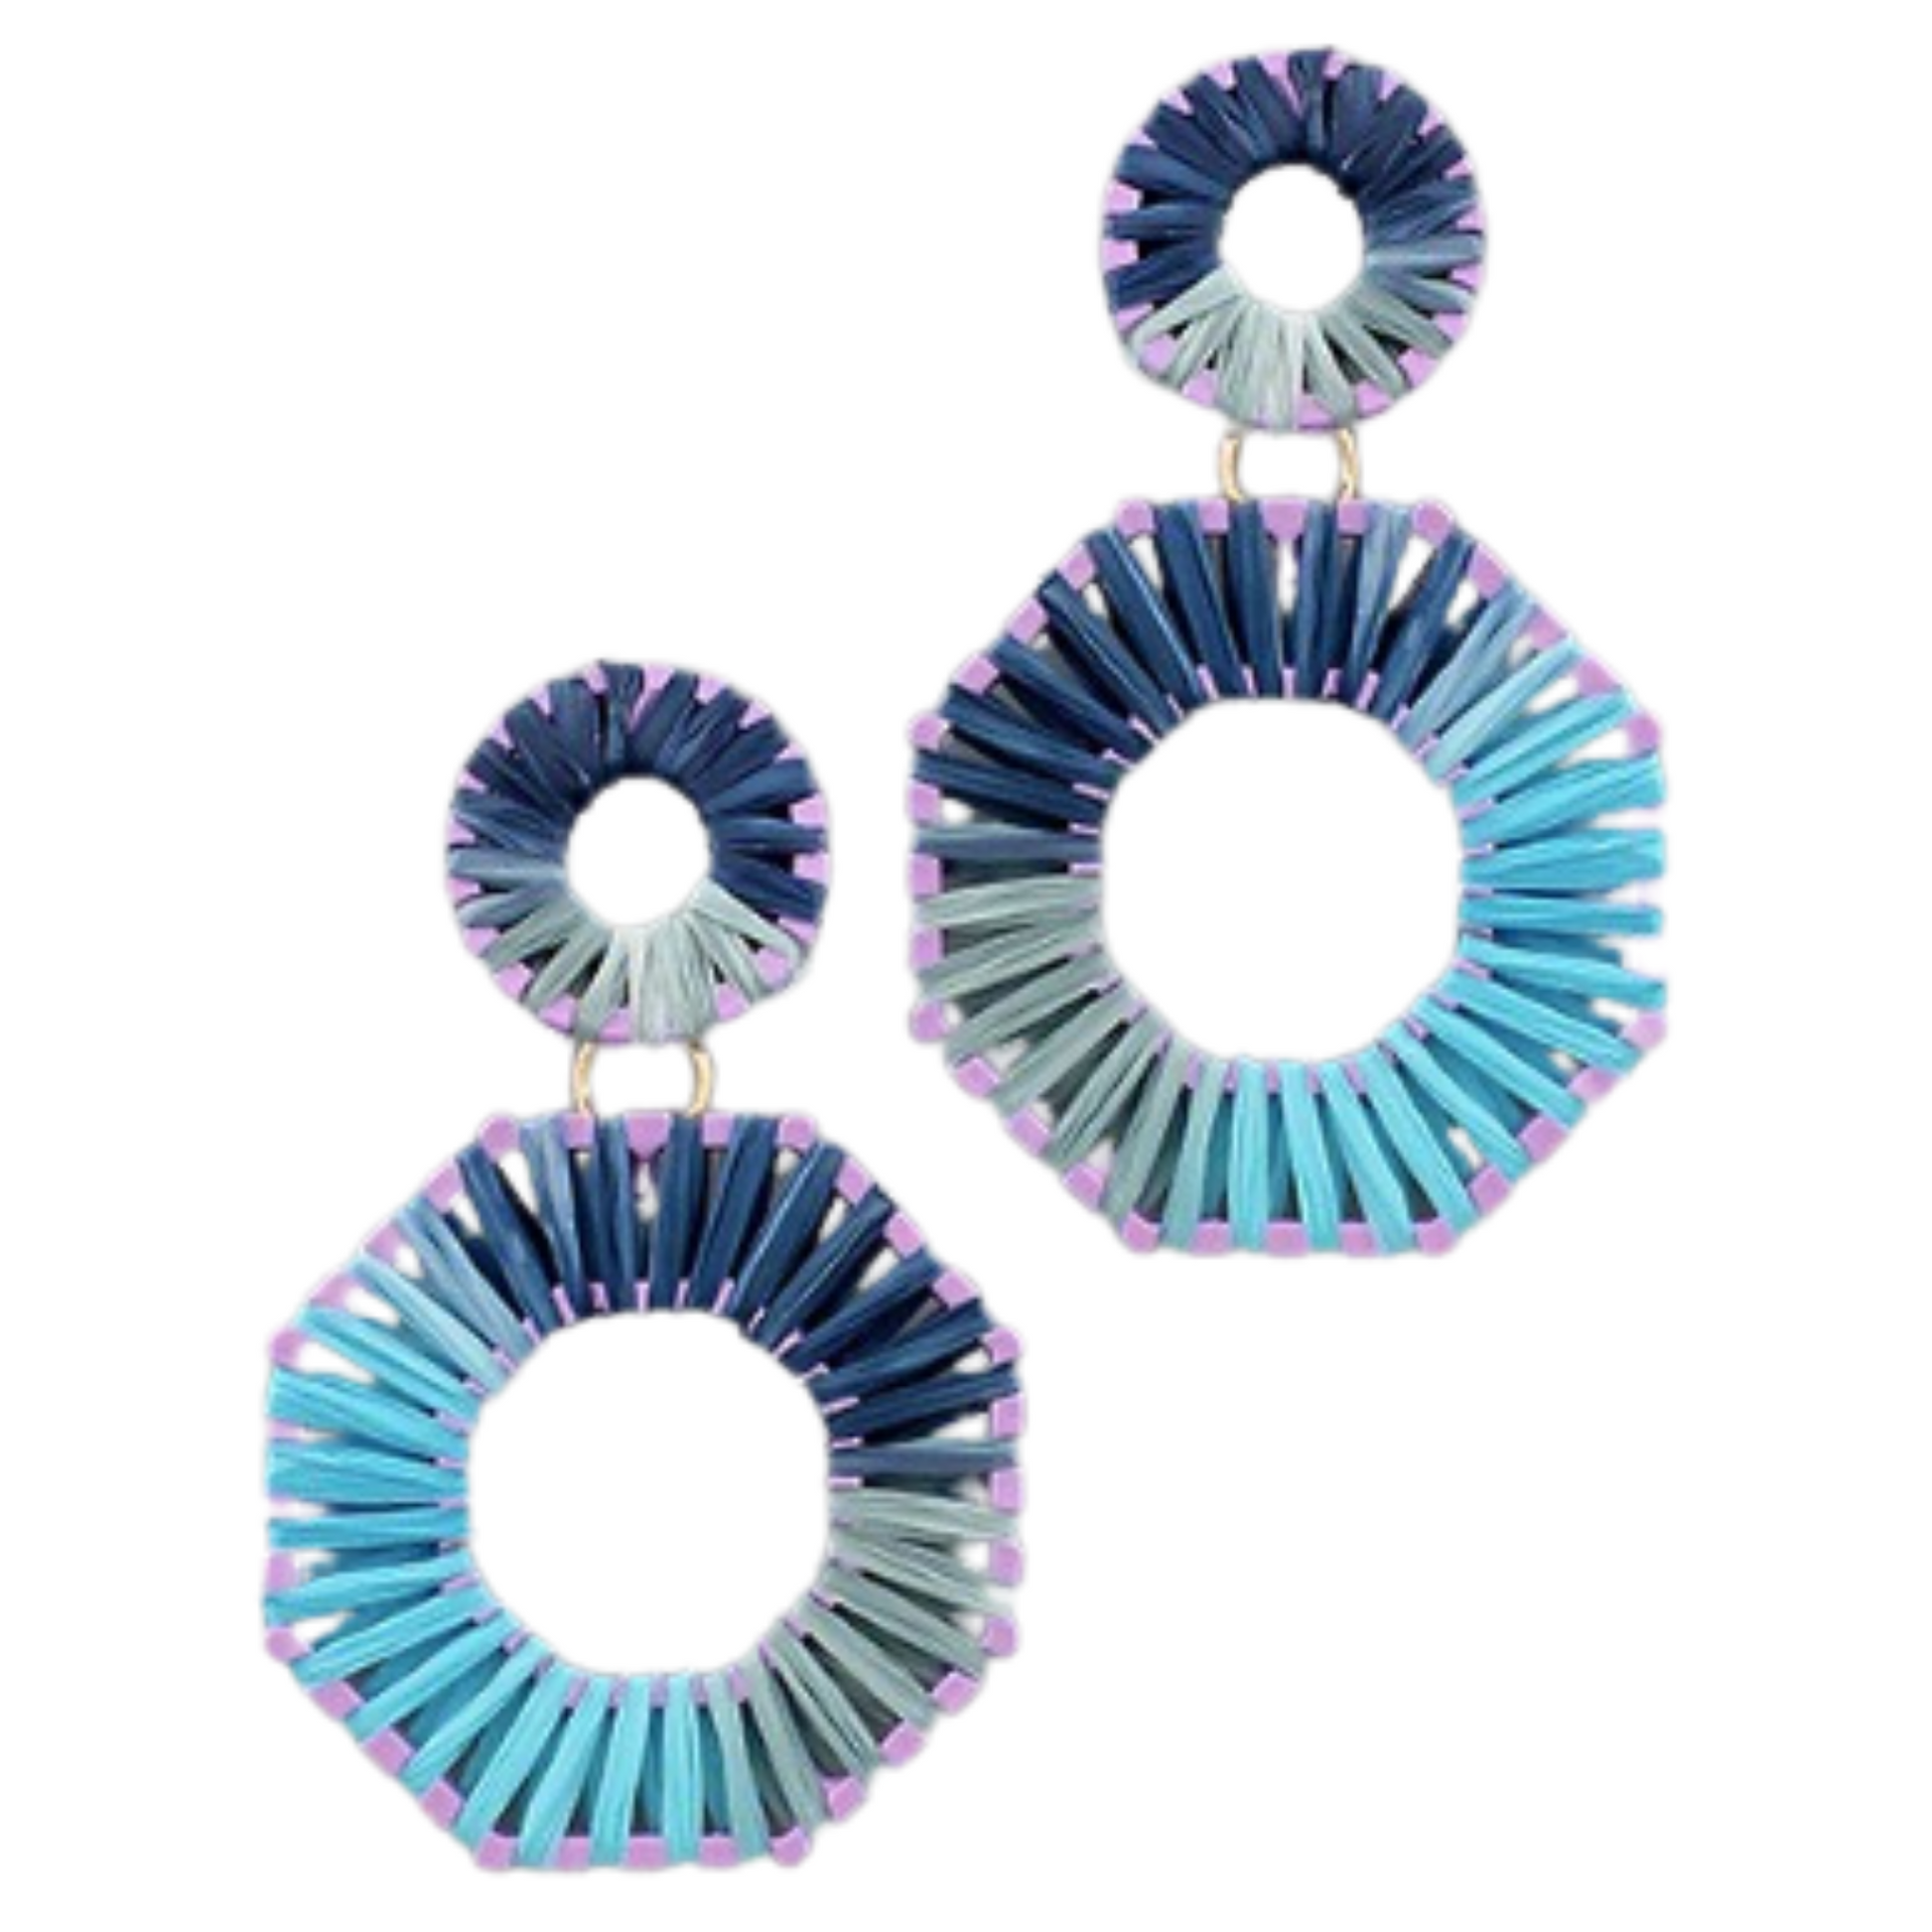 Elevate your look with these elegant octagon hoop earrings. Crafted with varying shades of blue, these chic dangle earrings feature a modern, hoop shape that adds an instant impact to any look.